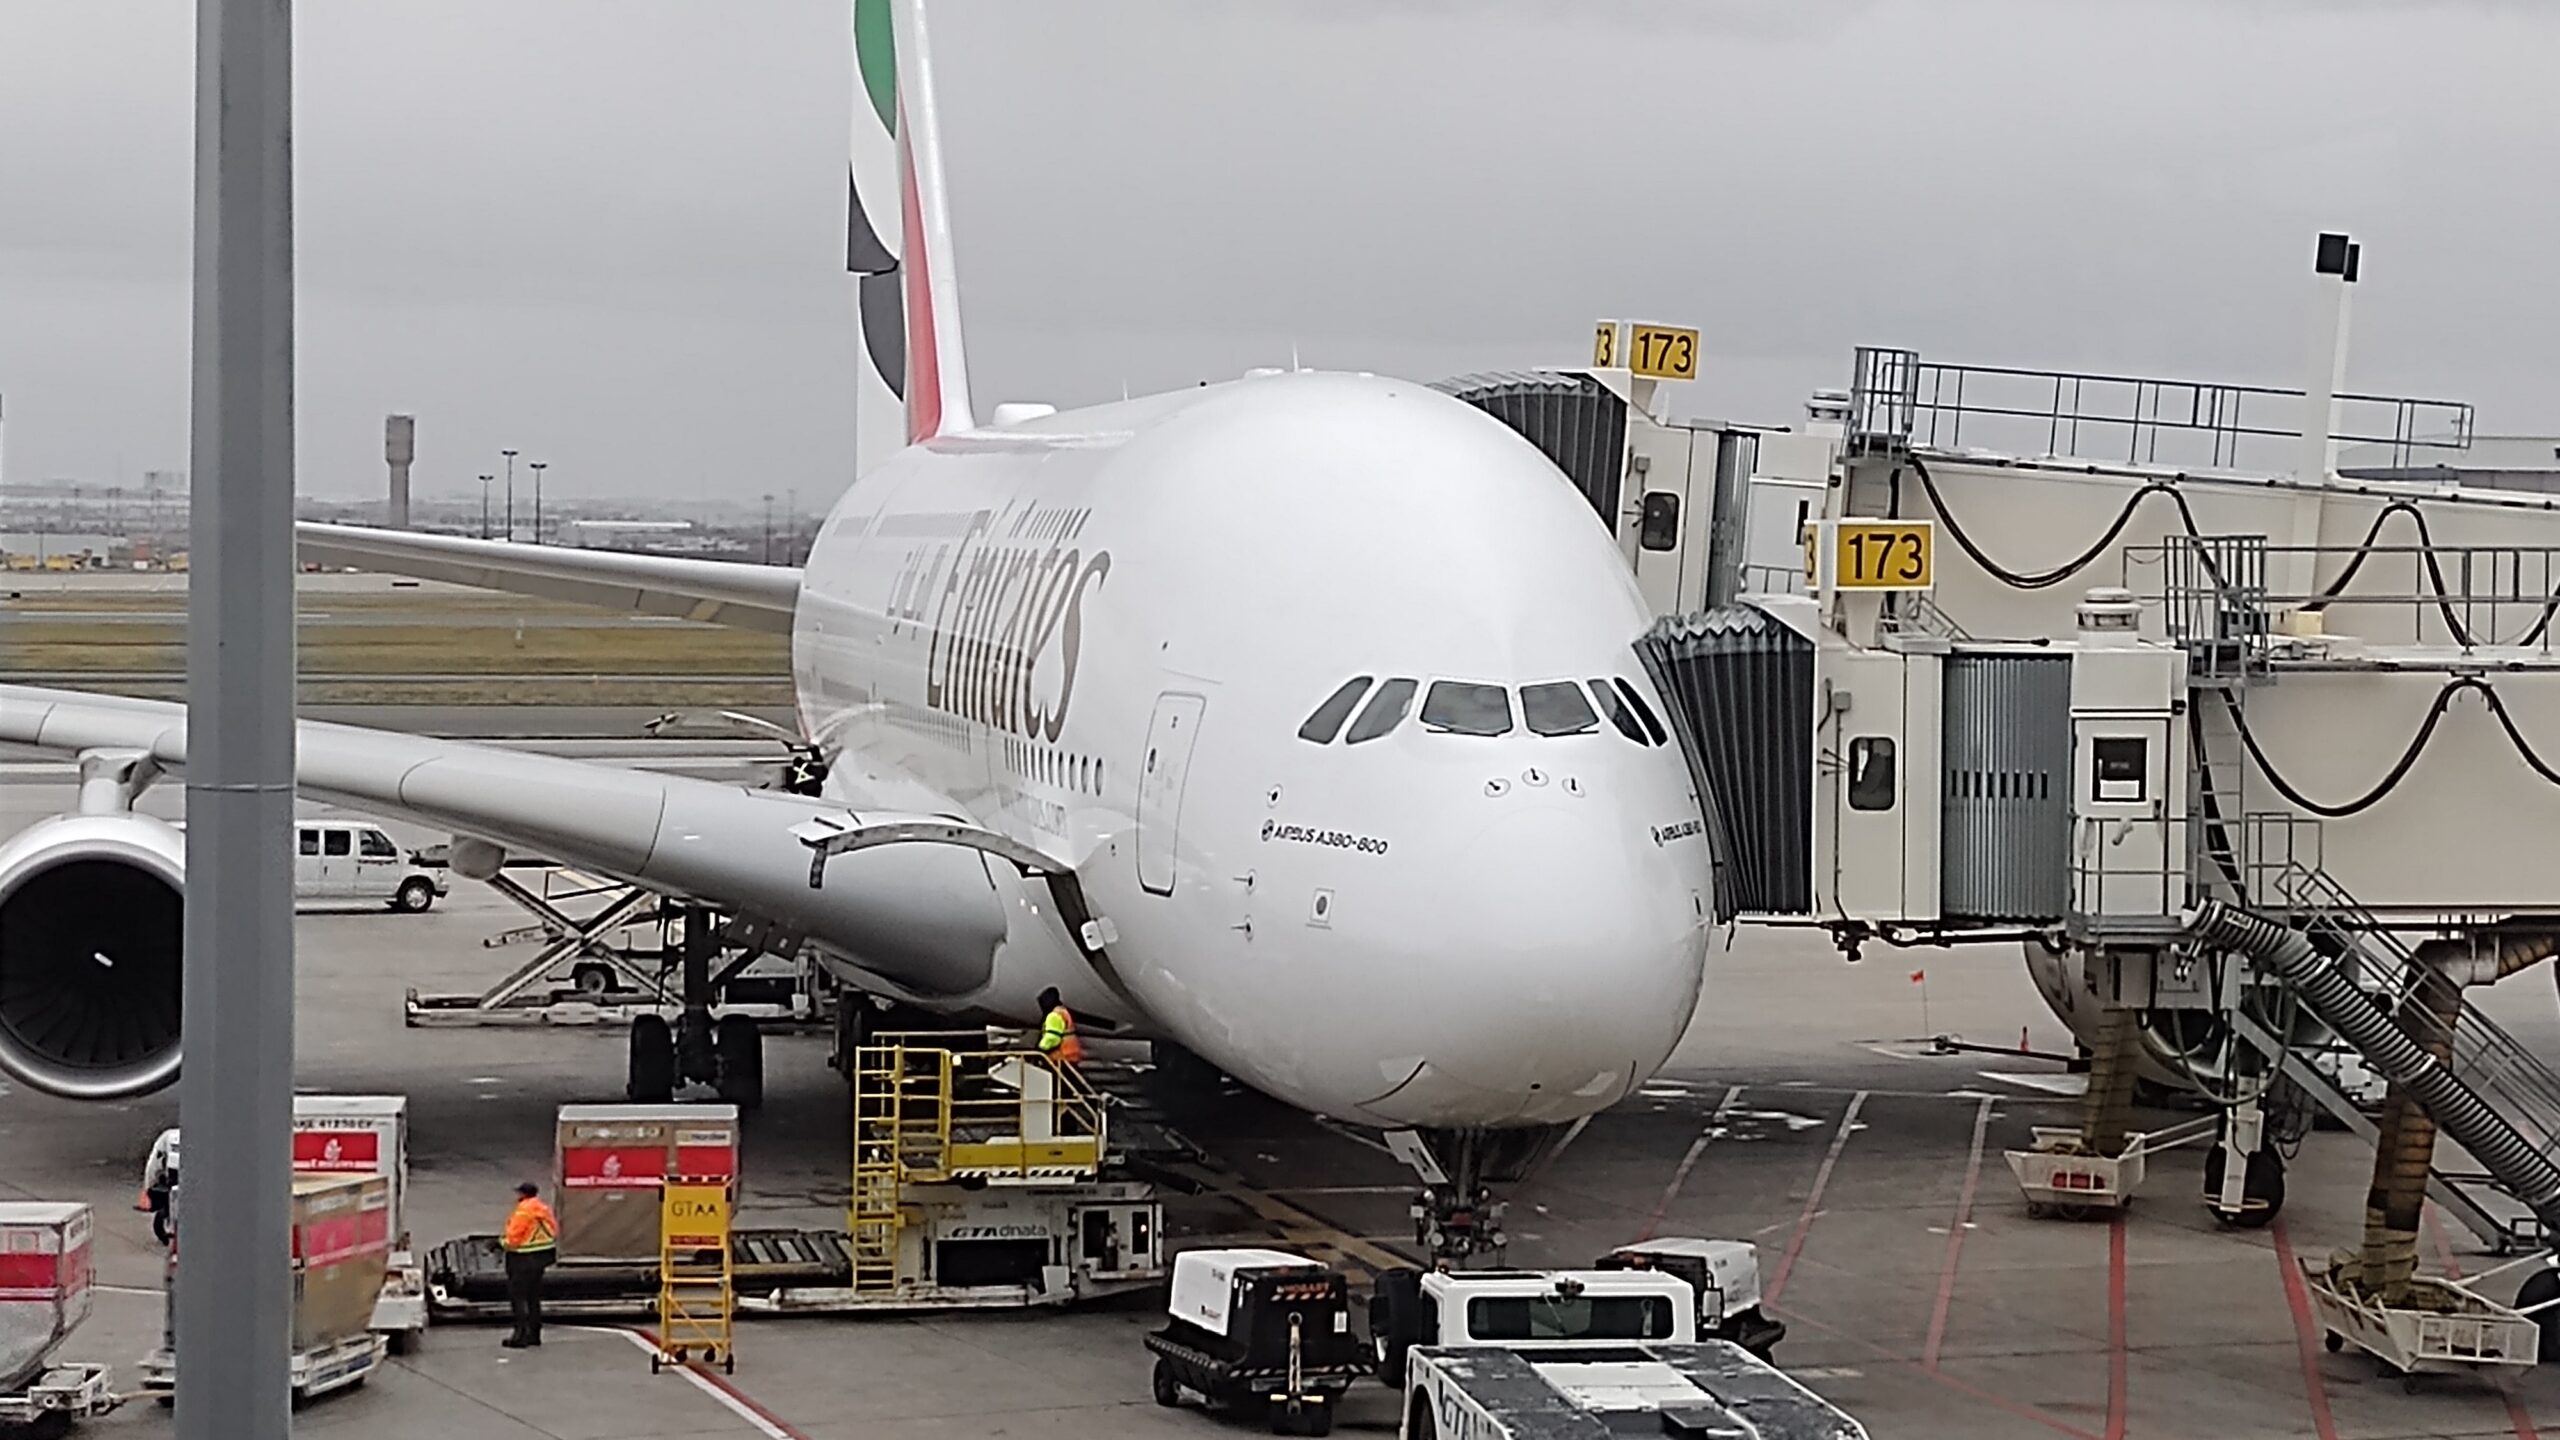 picture of Emirates 380-800 parked at the gate of Toronto's Pearson Airport.